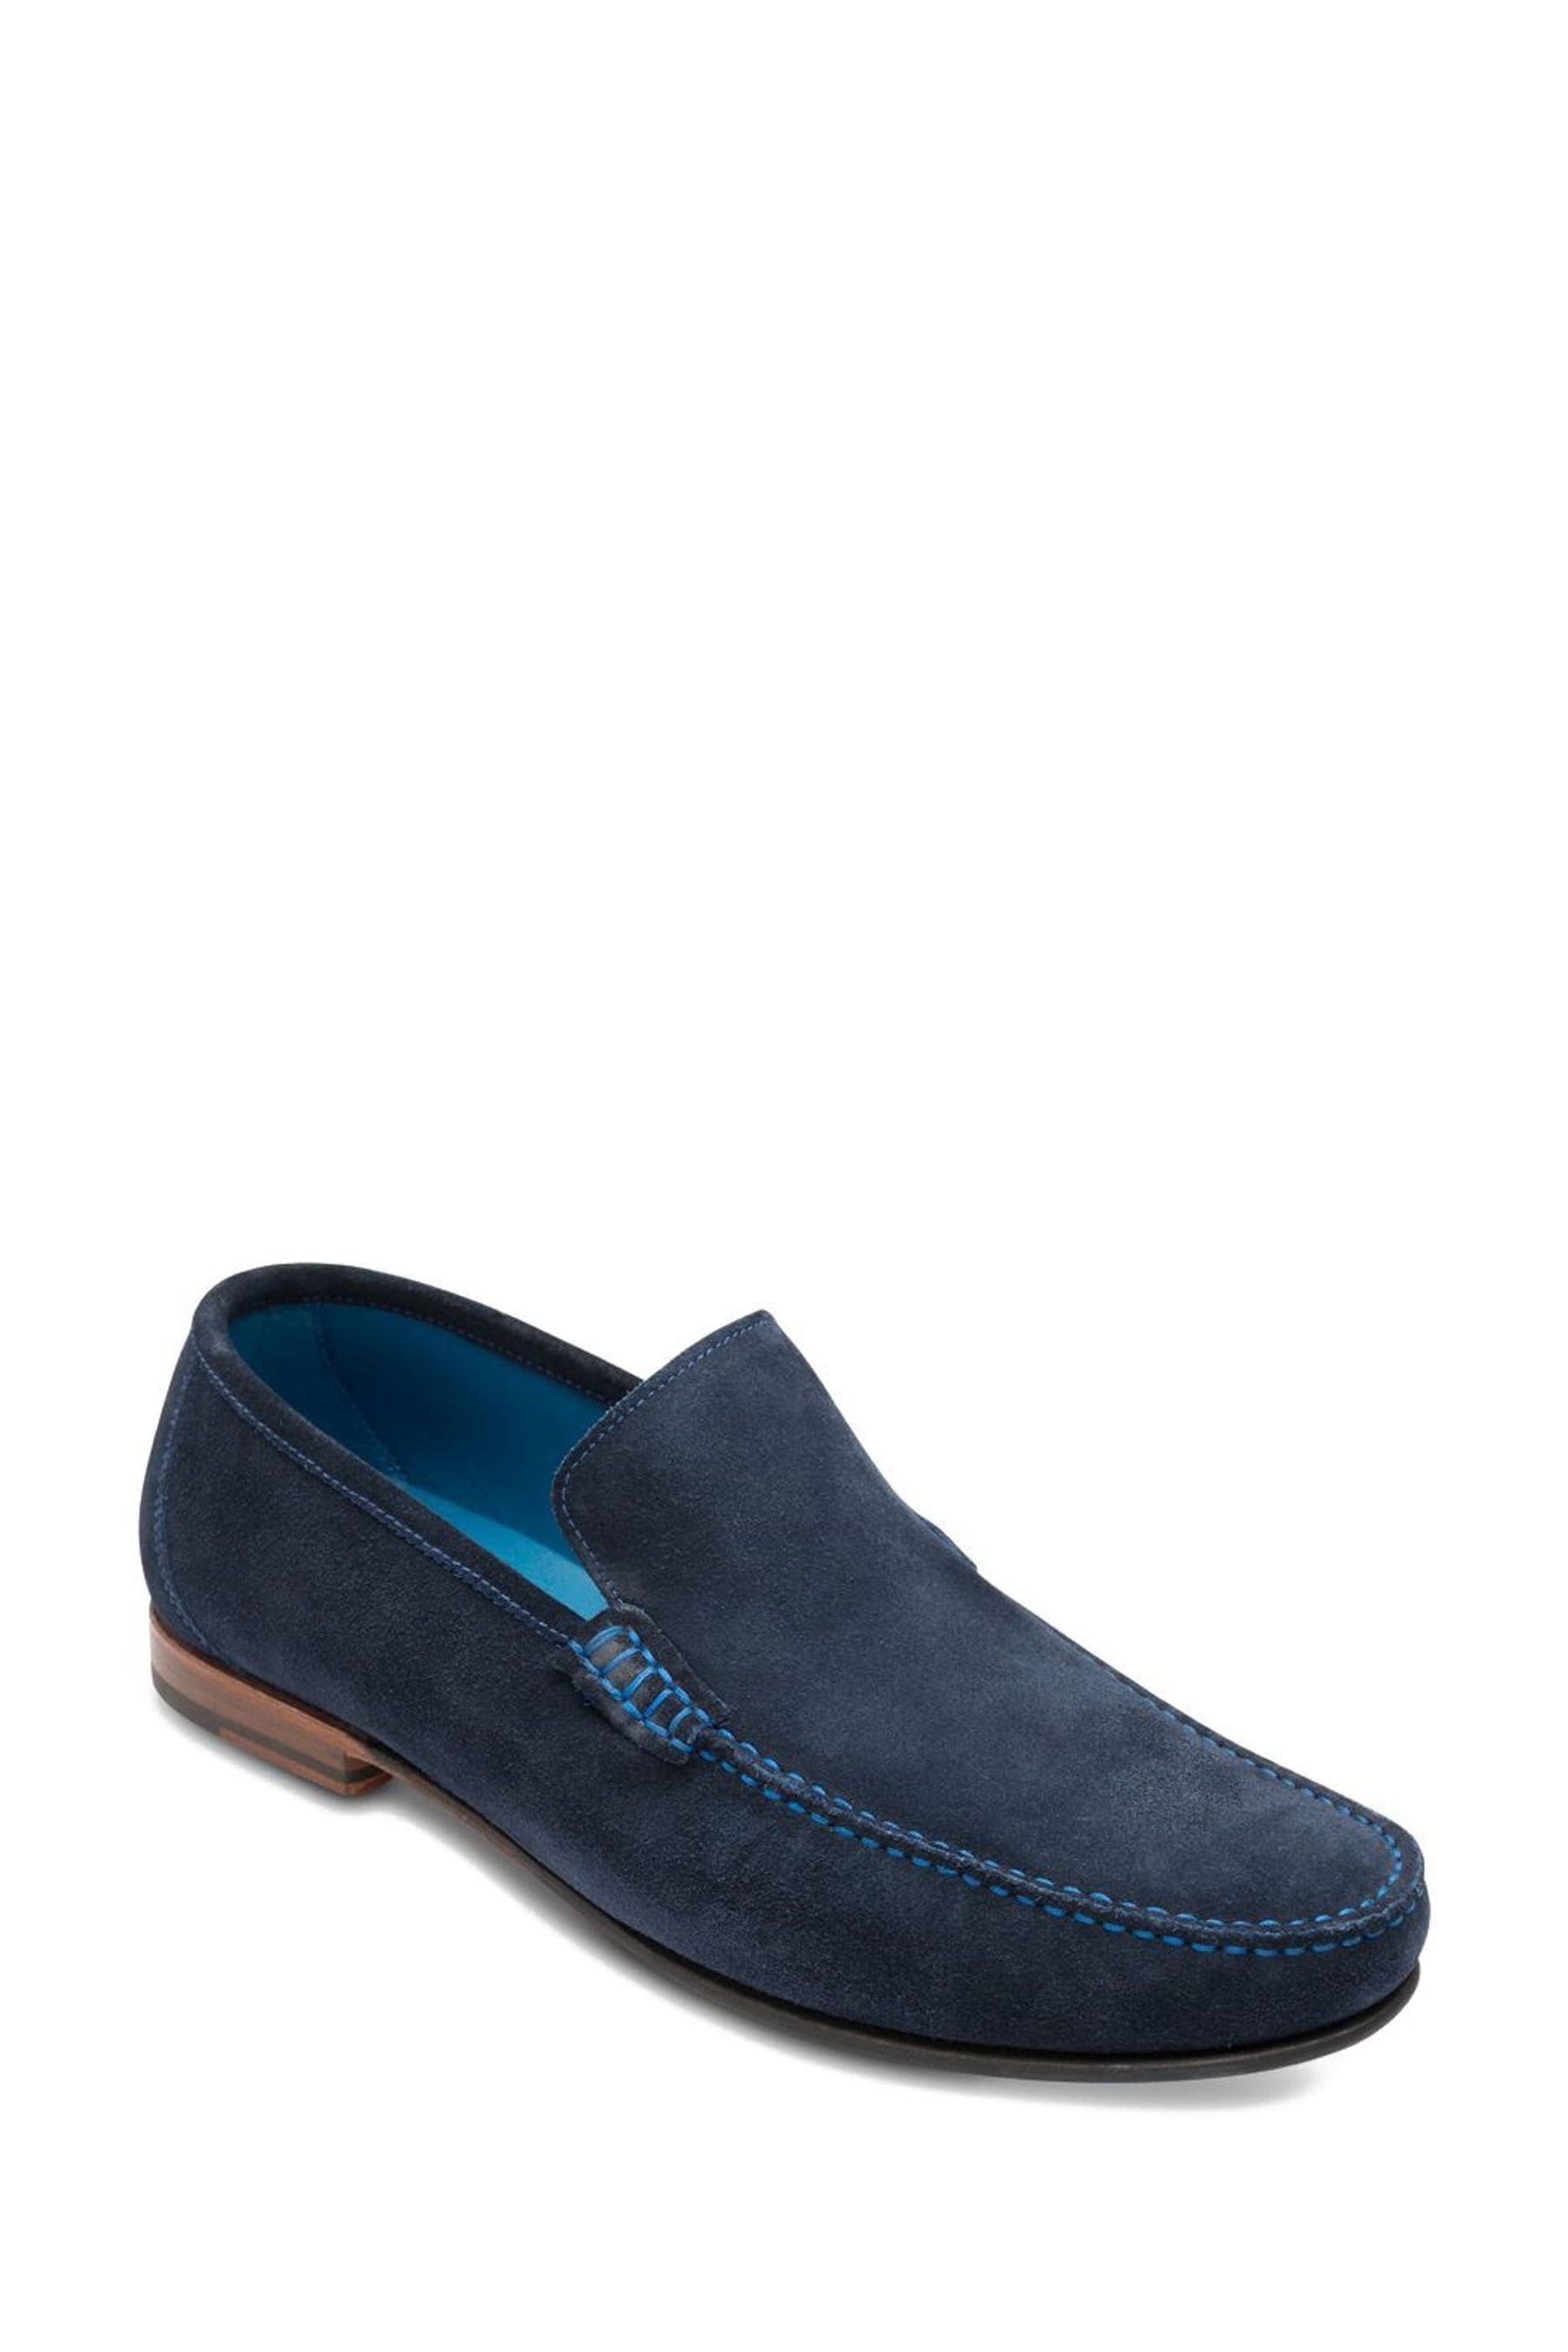 Buy Loake Nicholson Suede Apron Loafers from the Next UK online shop